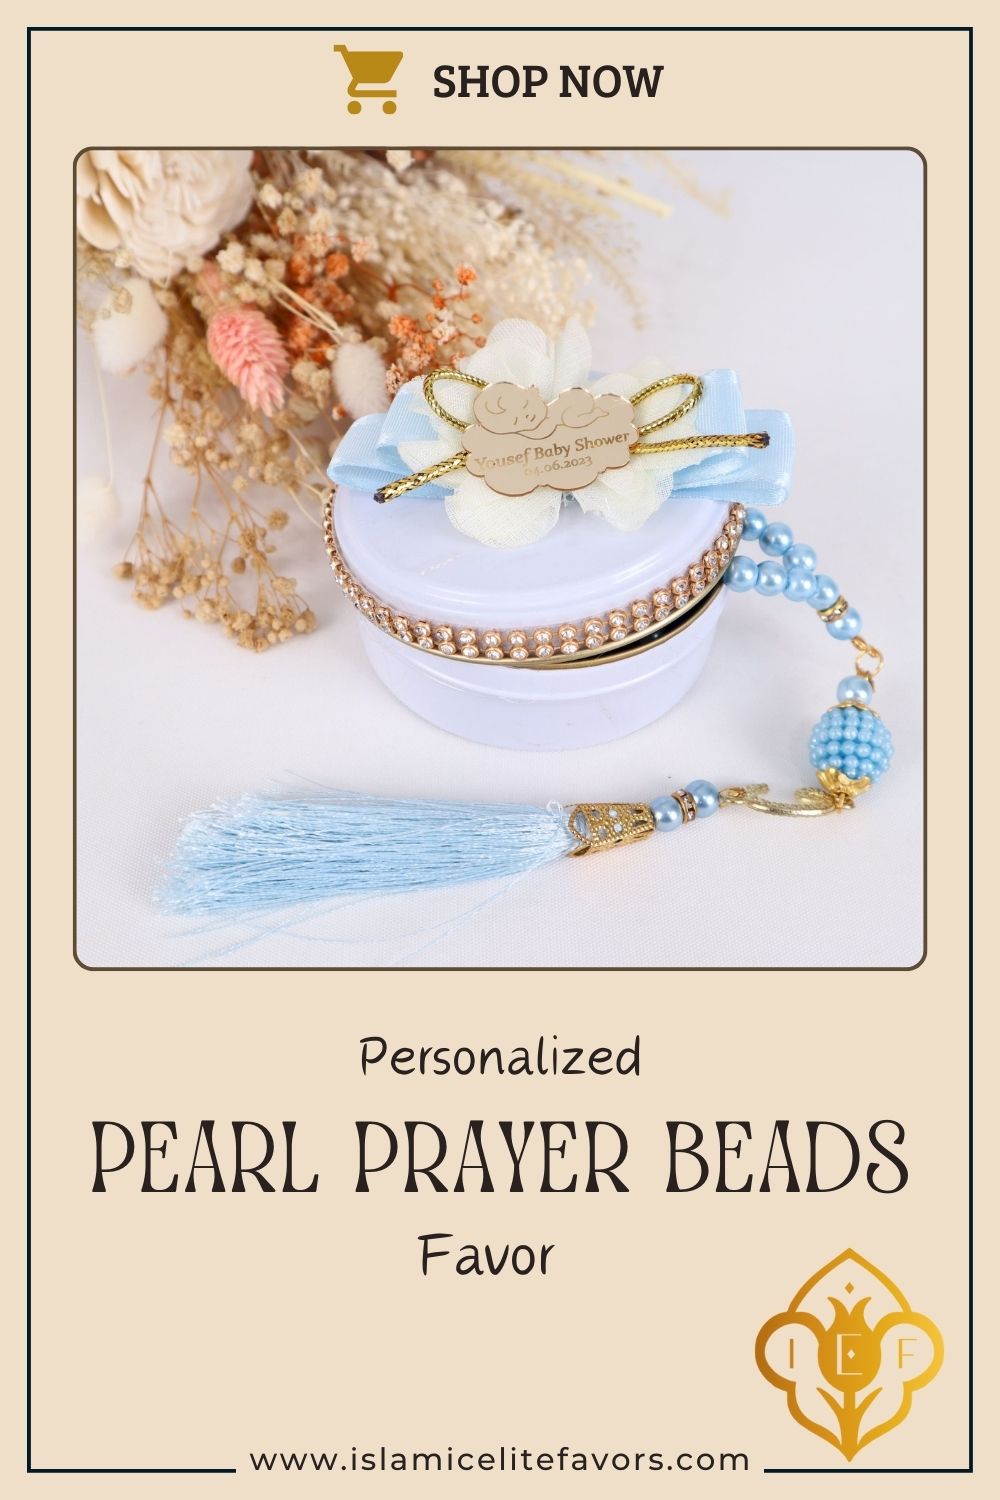 Personalized Pearl Prayer Beads in Metal Box Islamic Baby Shower Favor - Islamic Elite Favors is a handmade gift shop offering a wide variety of unique and personalized gifts for all occasions. Whether you're looking for the perfect Ramadan, Eid, Hajj, wedding gift or something special for a birthday, baby shower or anniversary, we have something for everyone. High quality, made with love.